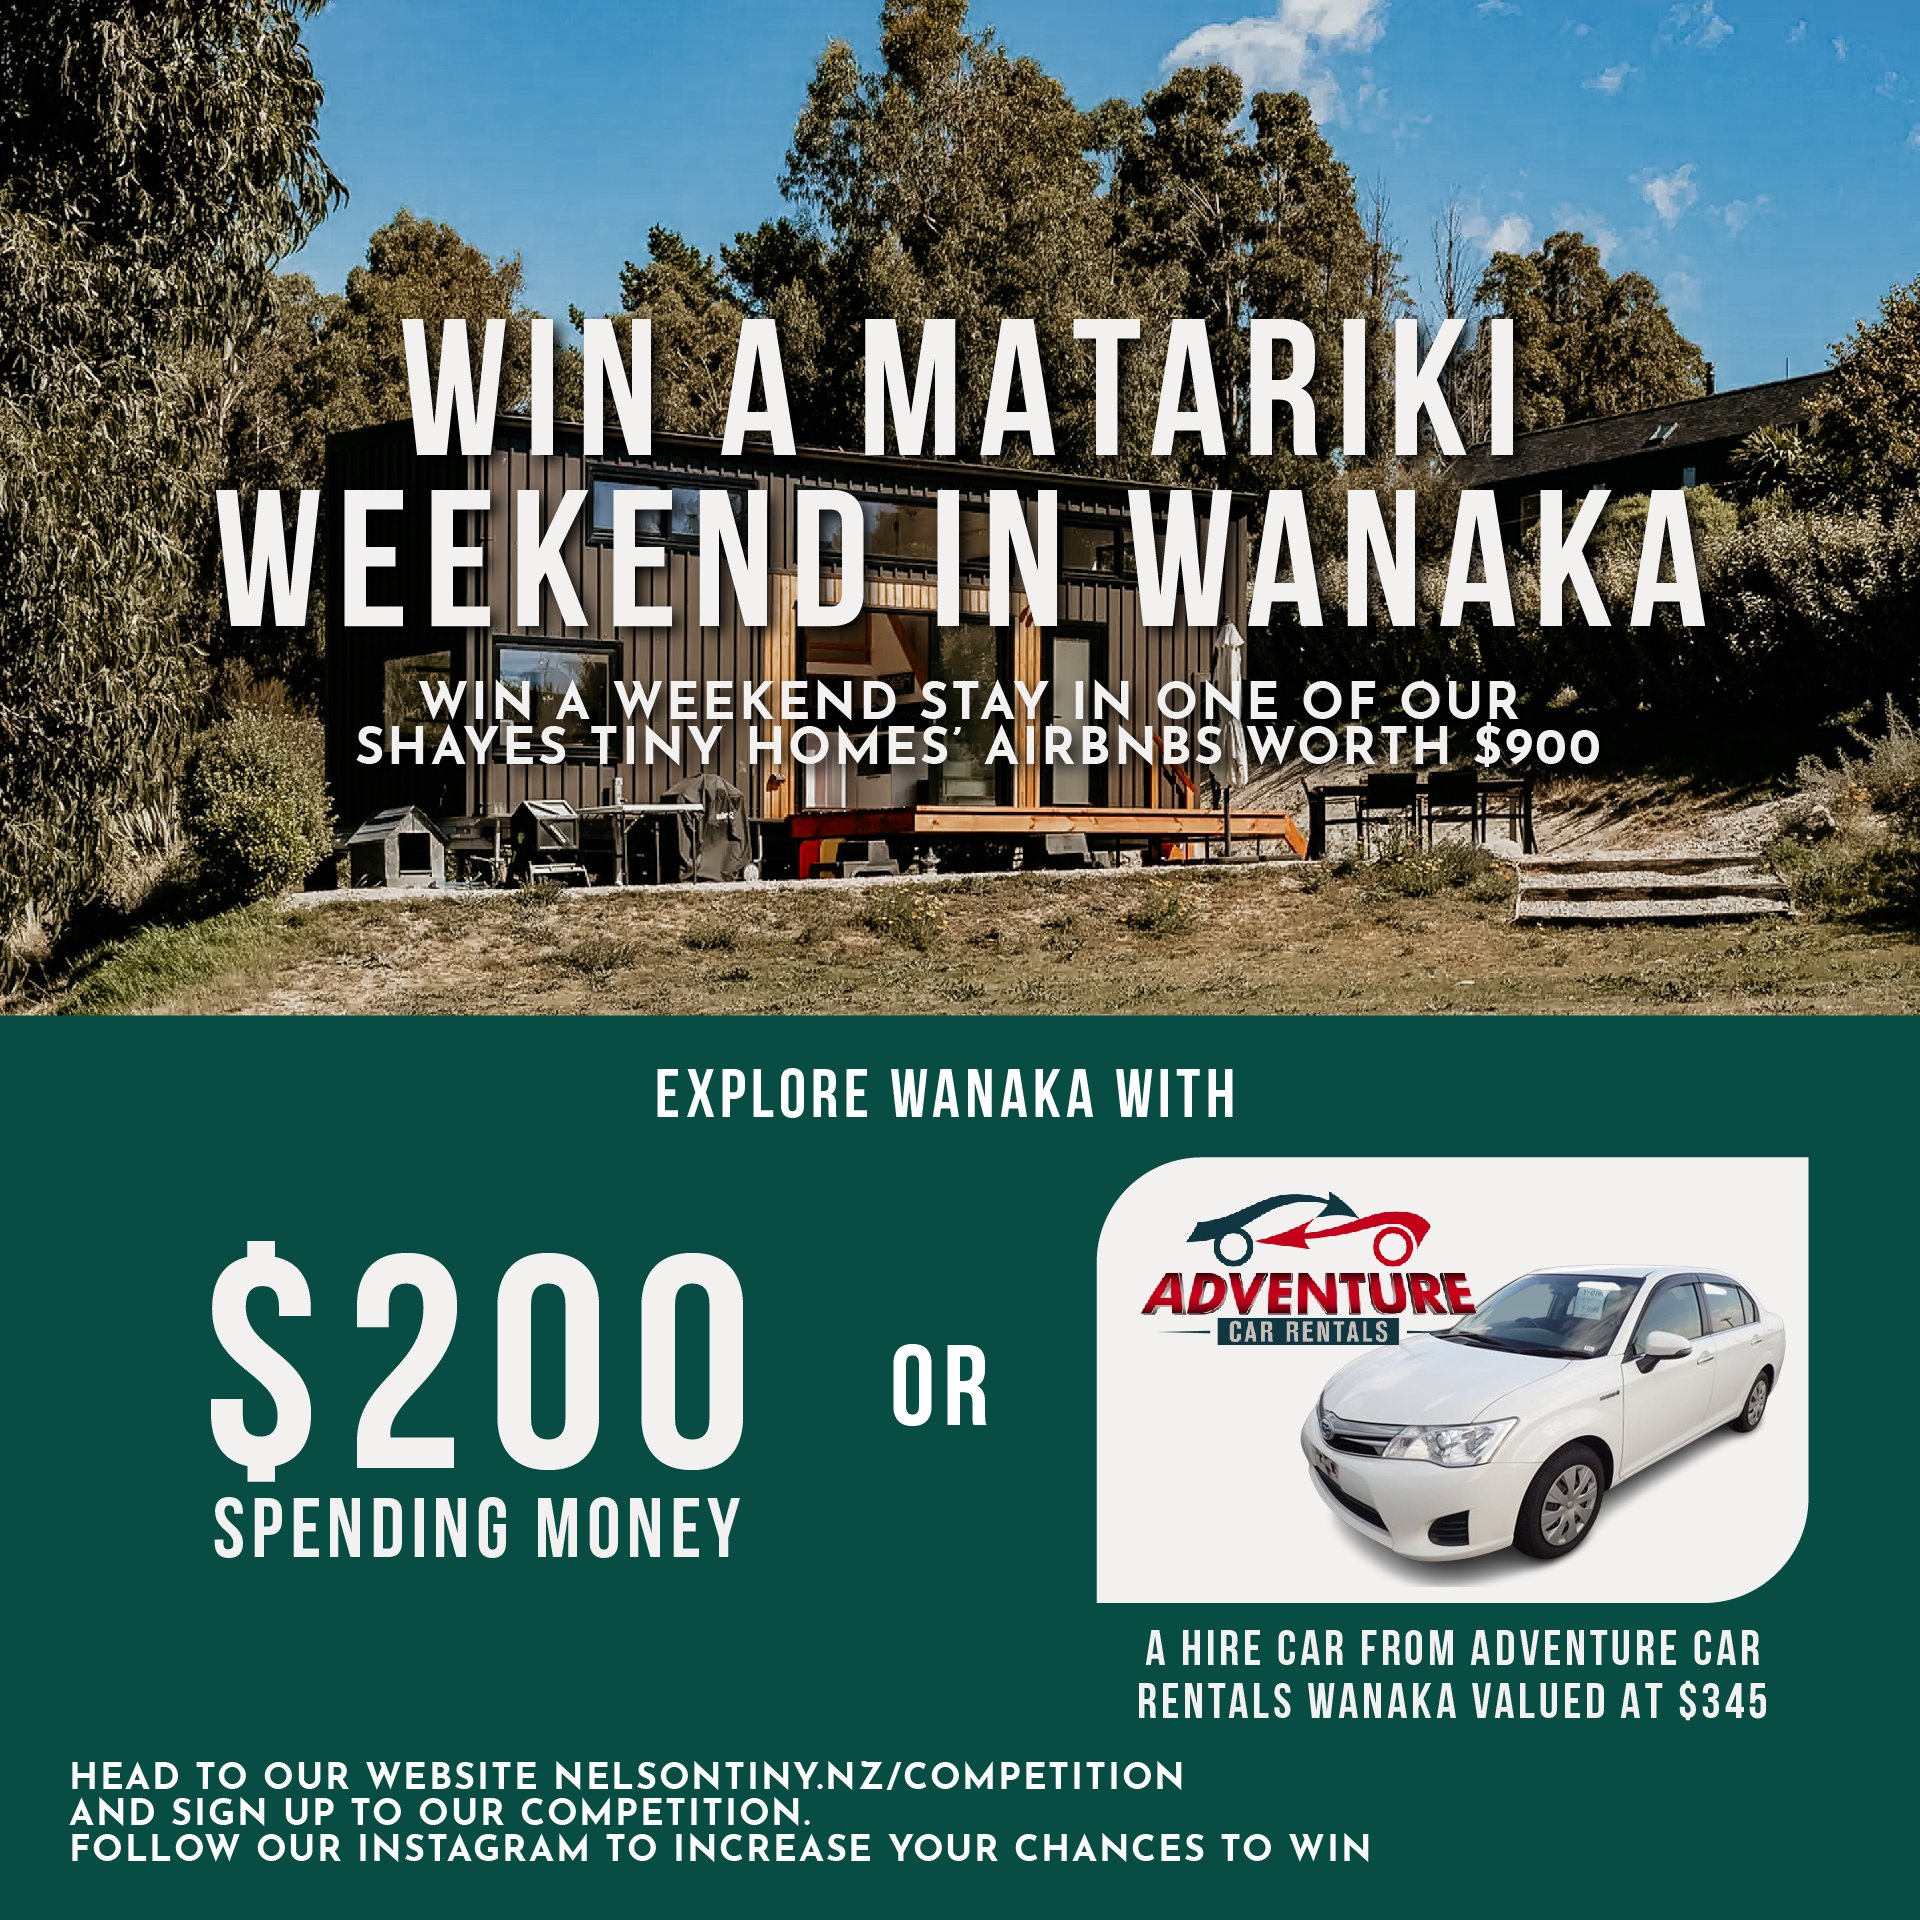 The prize just got sweeter!
You can win not only a weekend away in Wanaka but also either $200 spending money or a hire car from our friends at Adventure Rental Cars Wanaka New Zealand
T&amp;Cs apply
Visit link in bio to sign up
(Double your chances 